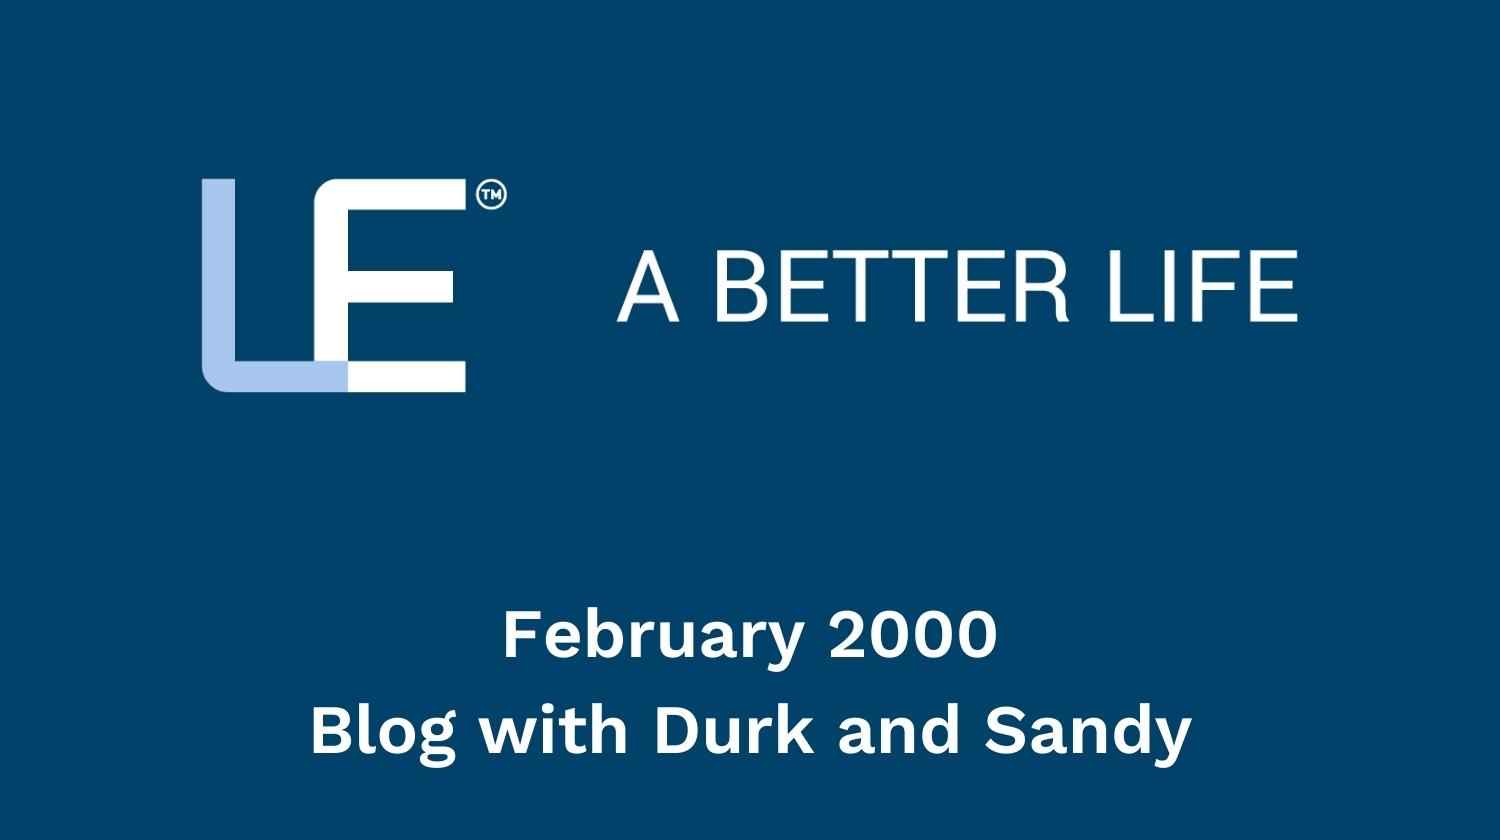 February 2000 Blog with Durk and Sandy